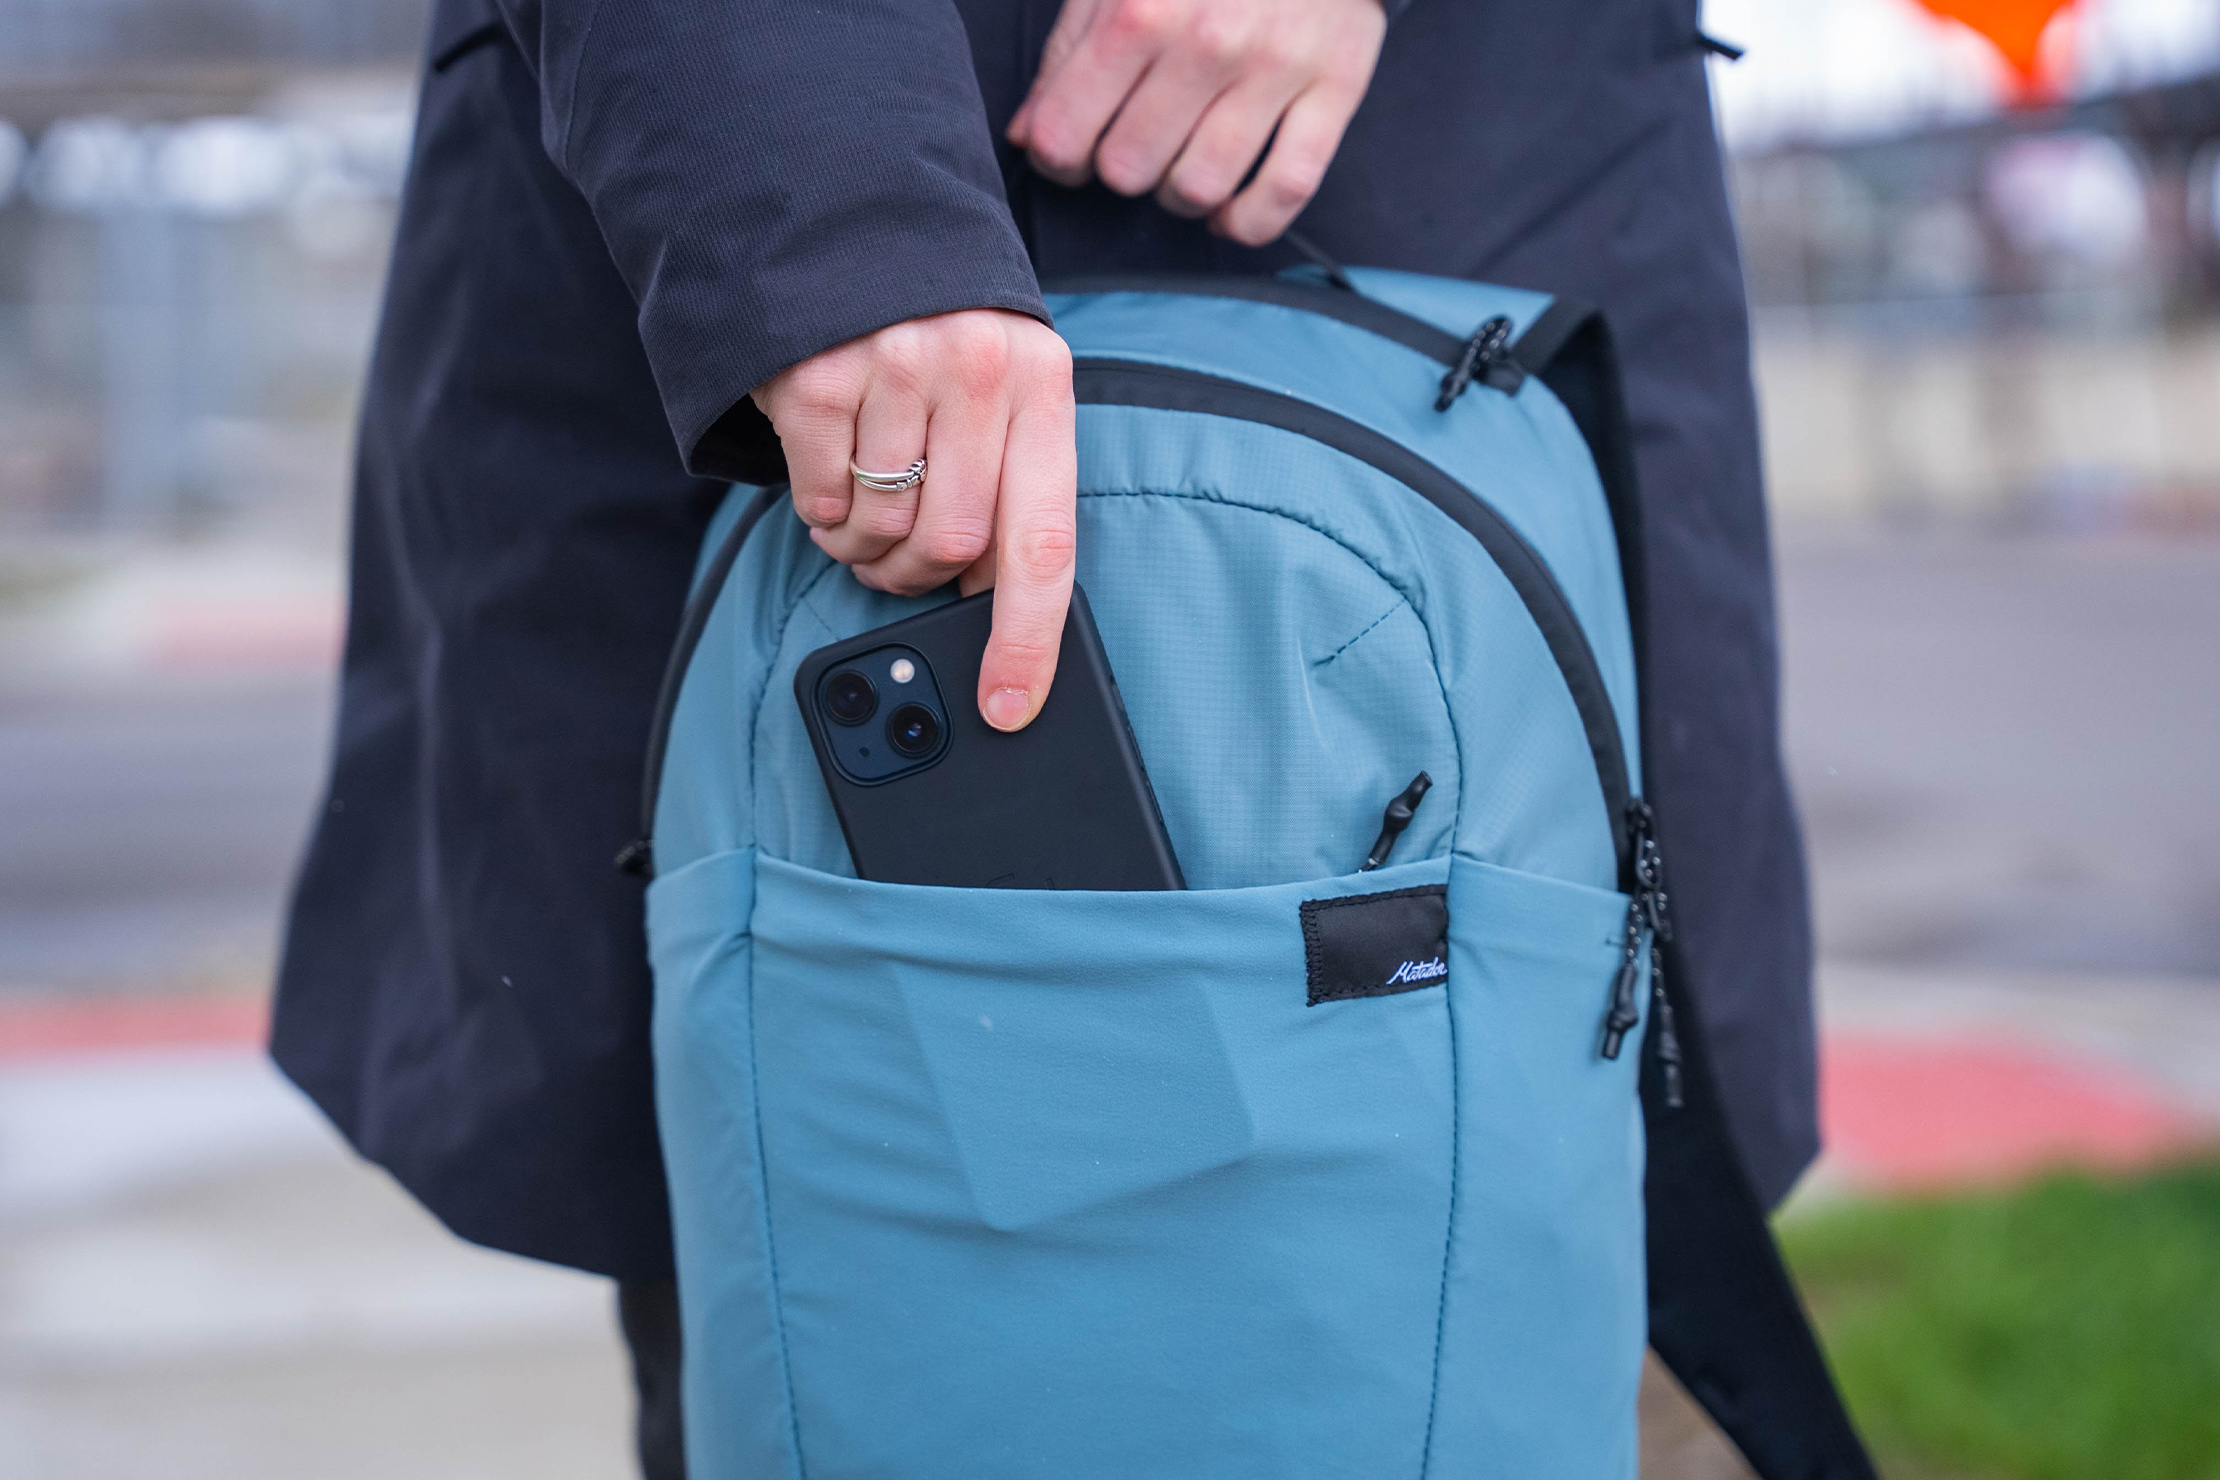 Matador ReFraction Packable Backpack In Use